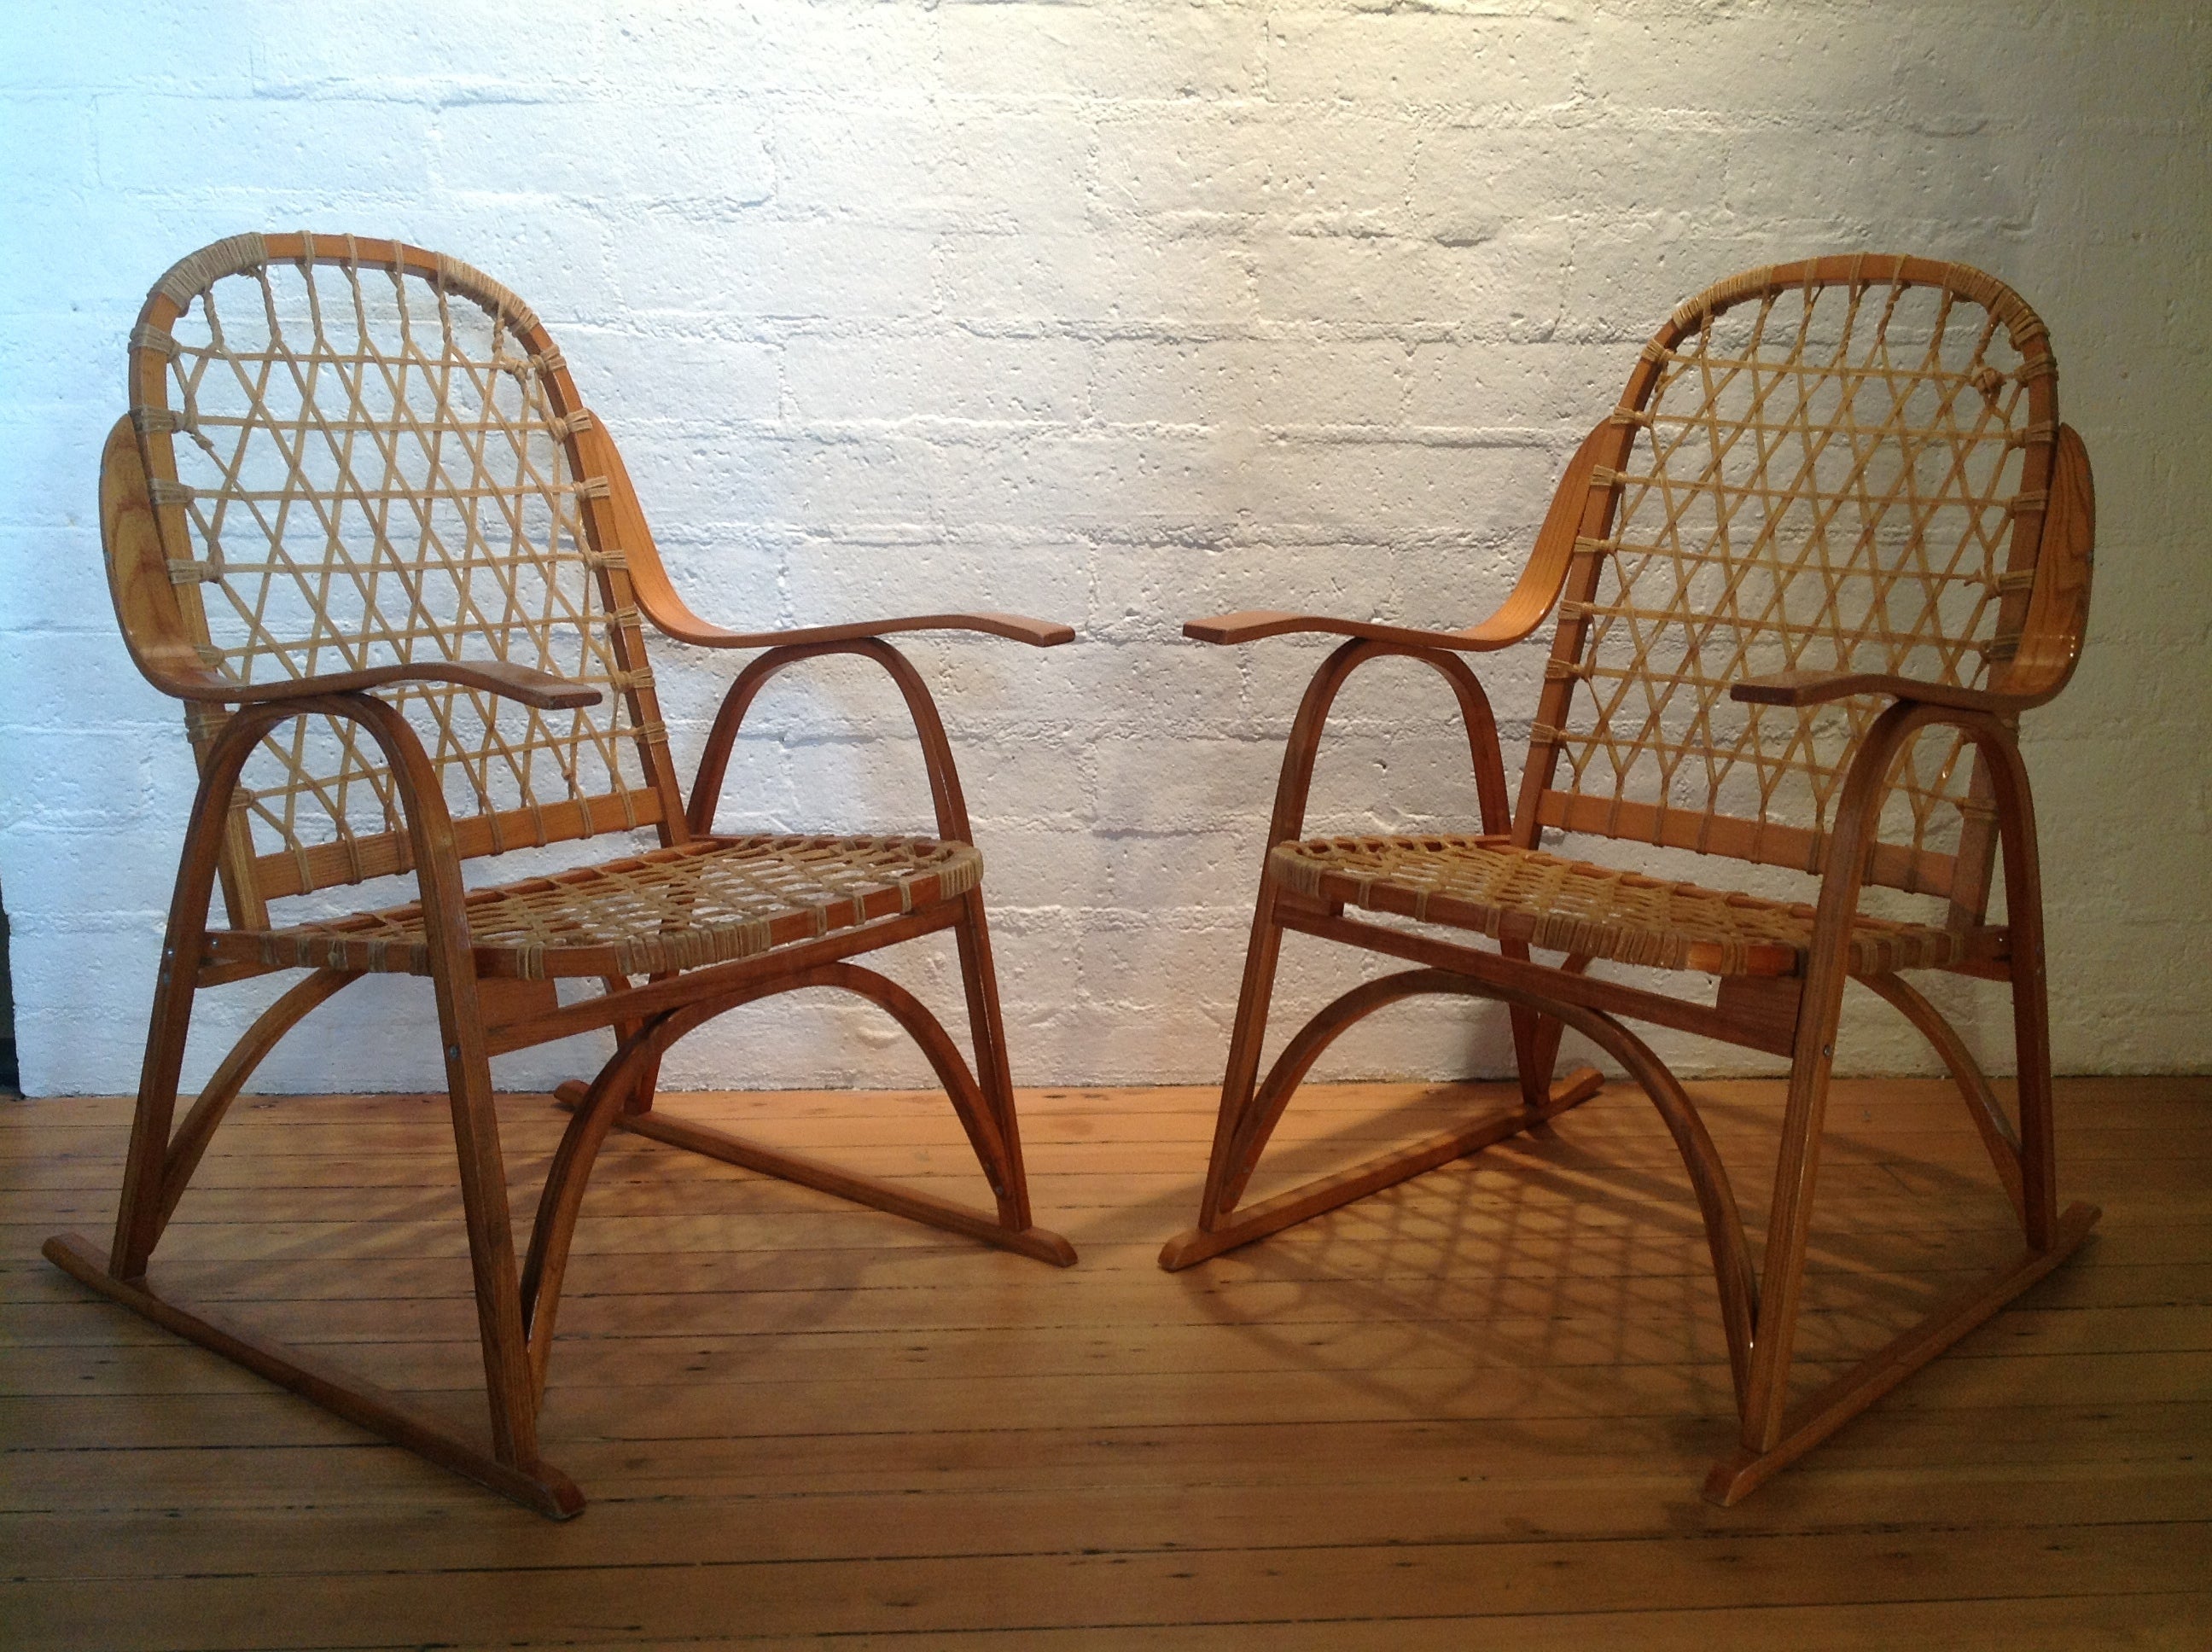 A pair of Snow shoe chairs by Snocraft